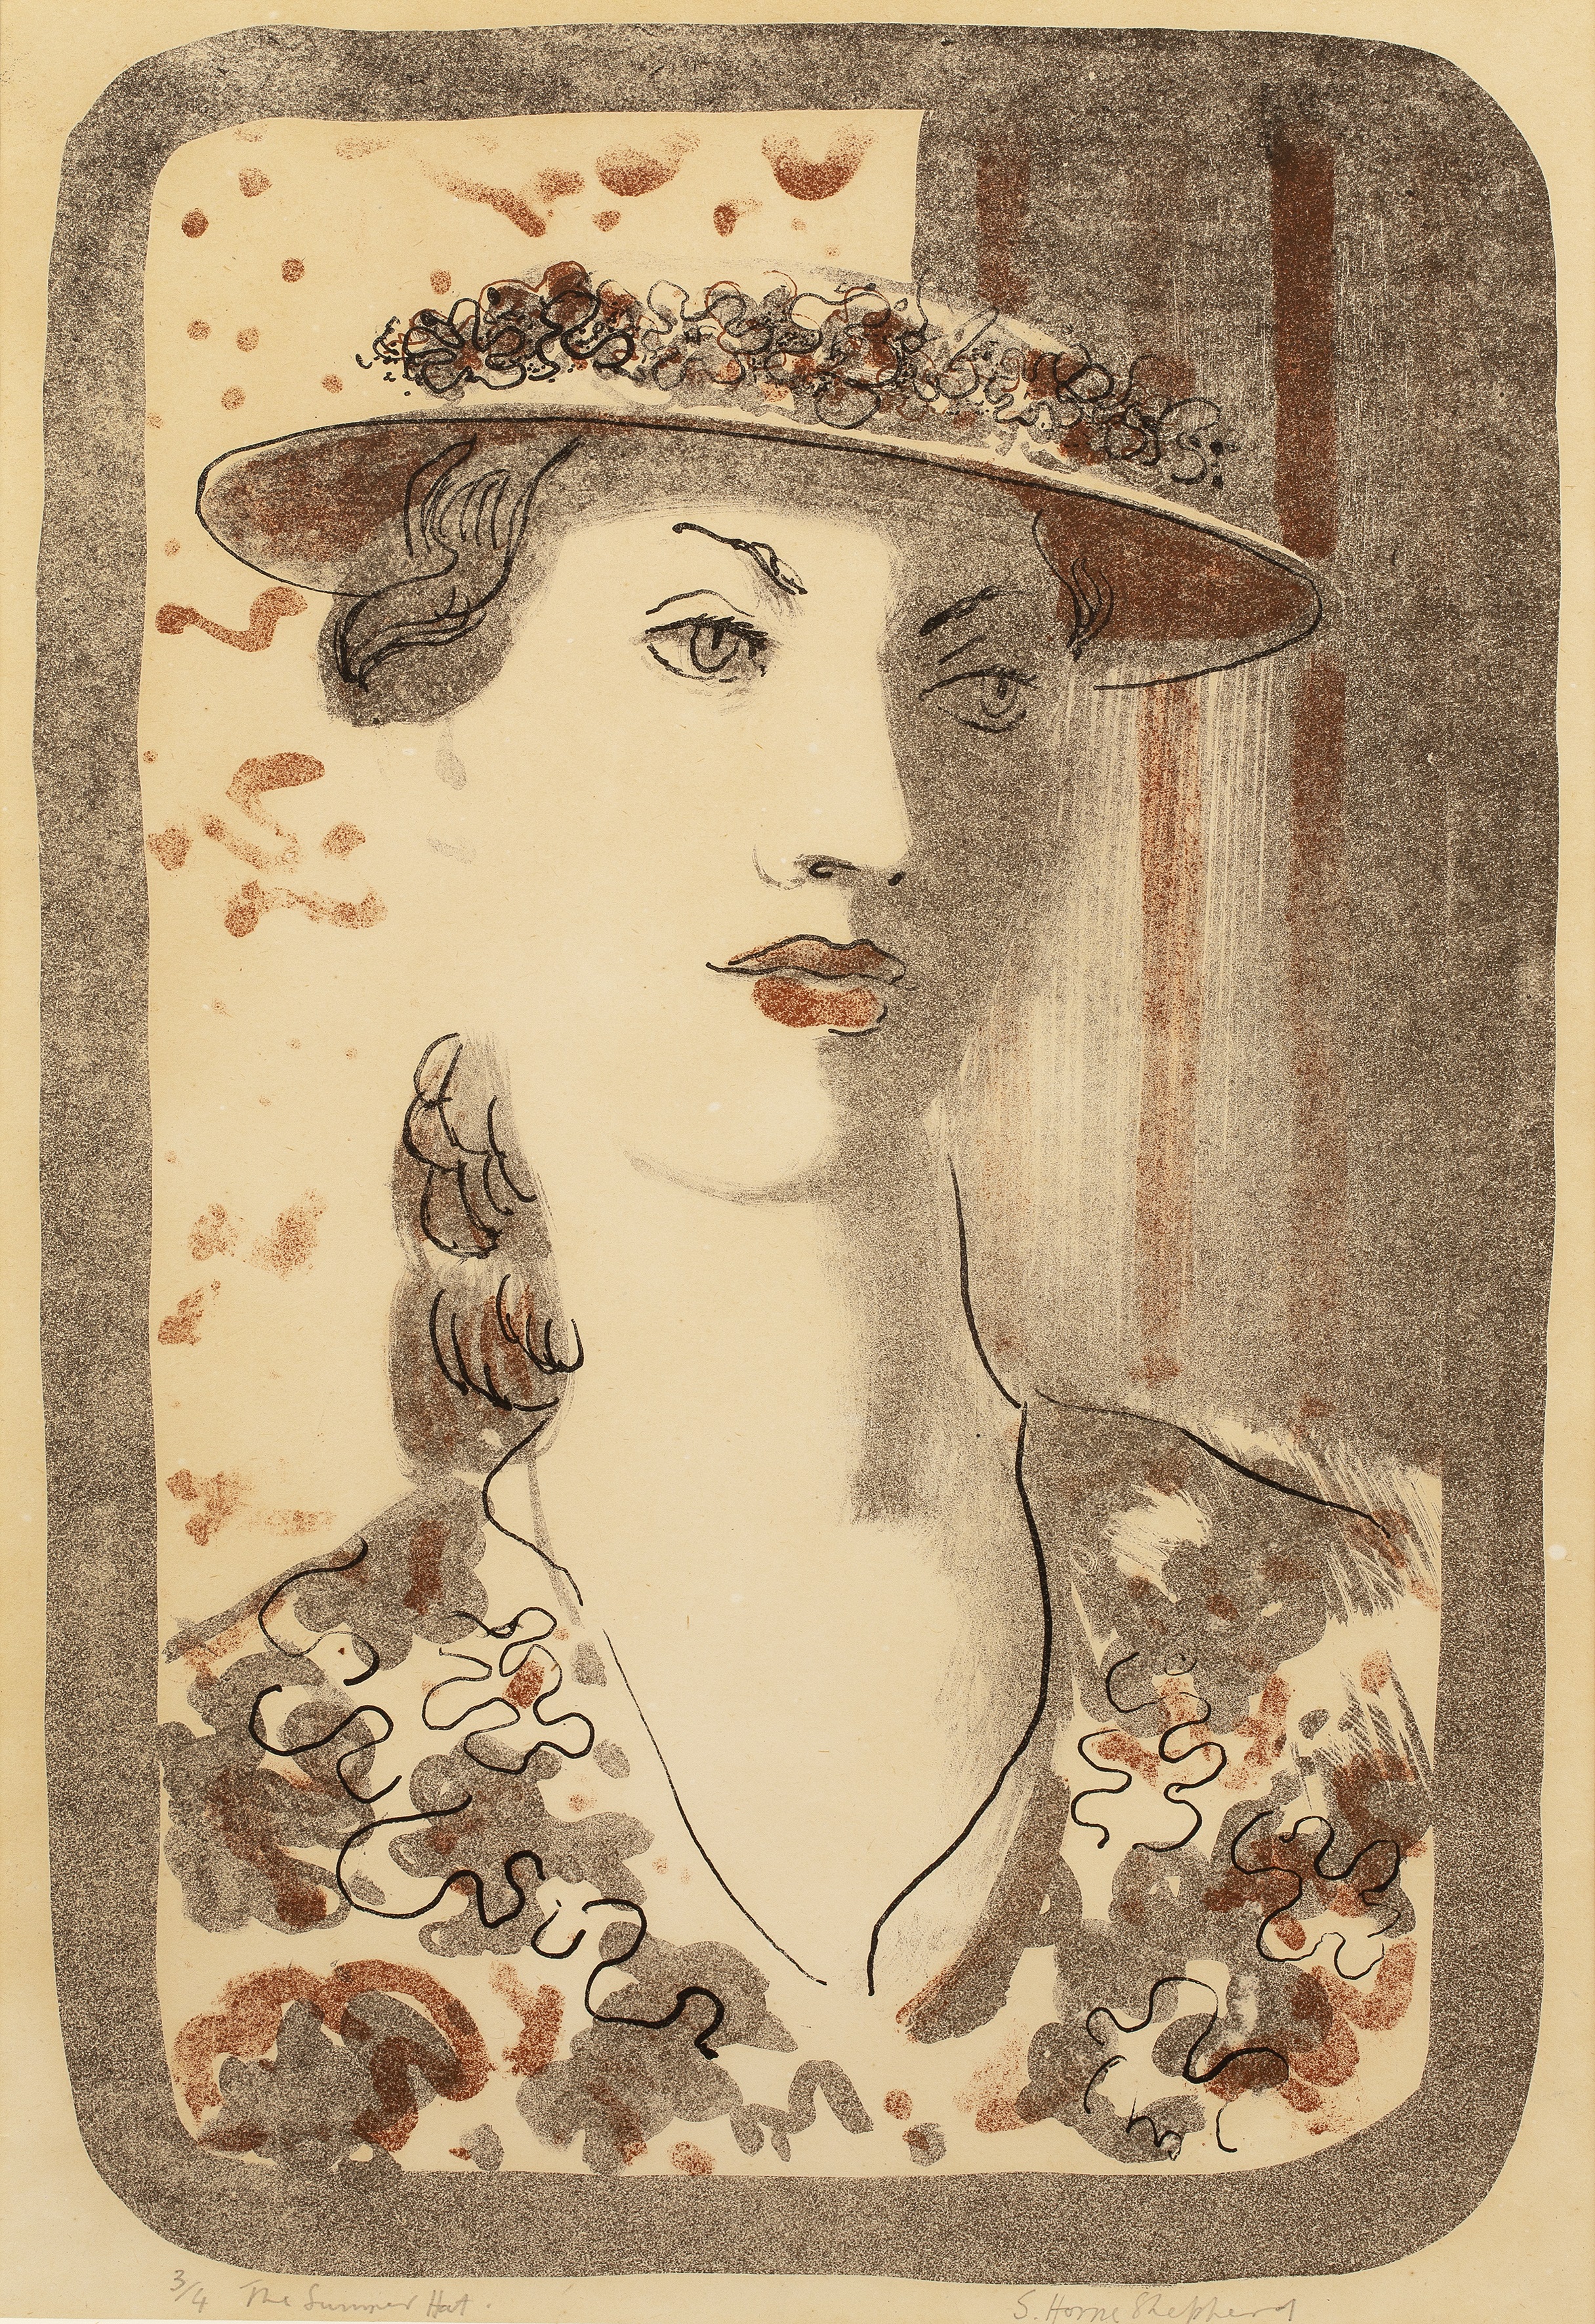 Sidney Horne-Shepherd (1909-1993) The Summer Hat, circa 1950 3/4, signed, titled, and numbered in